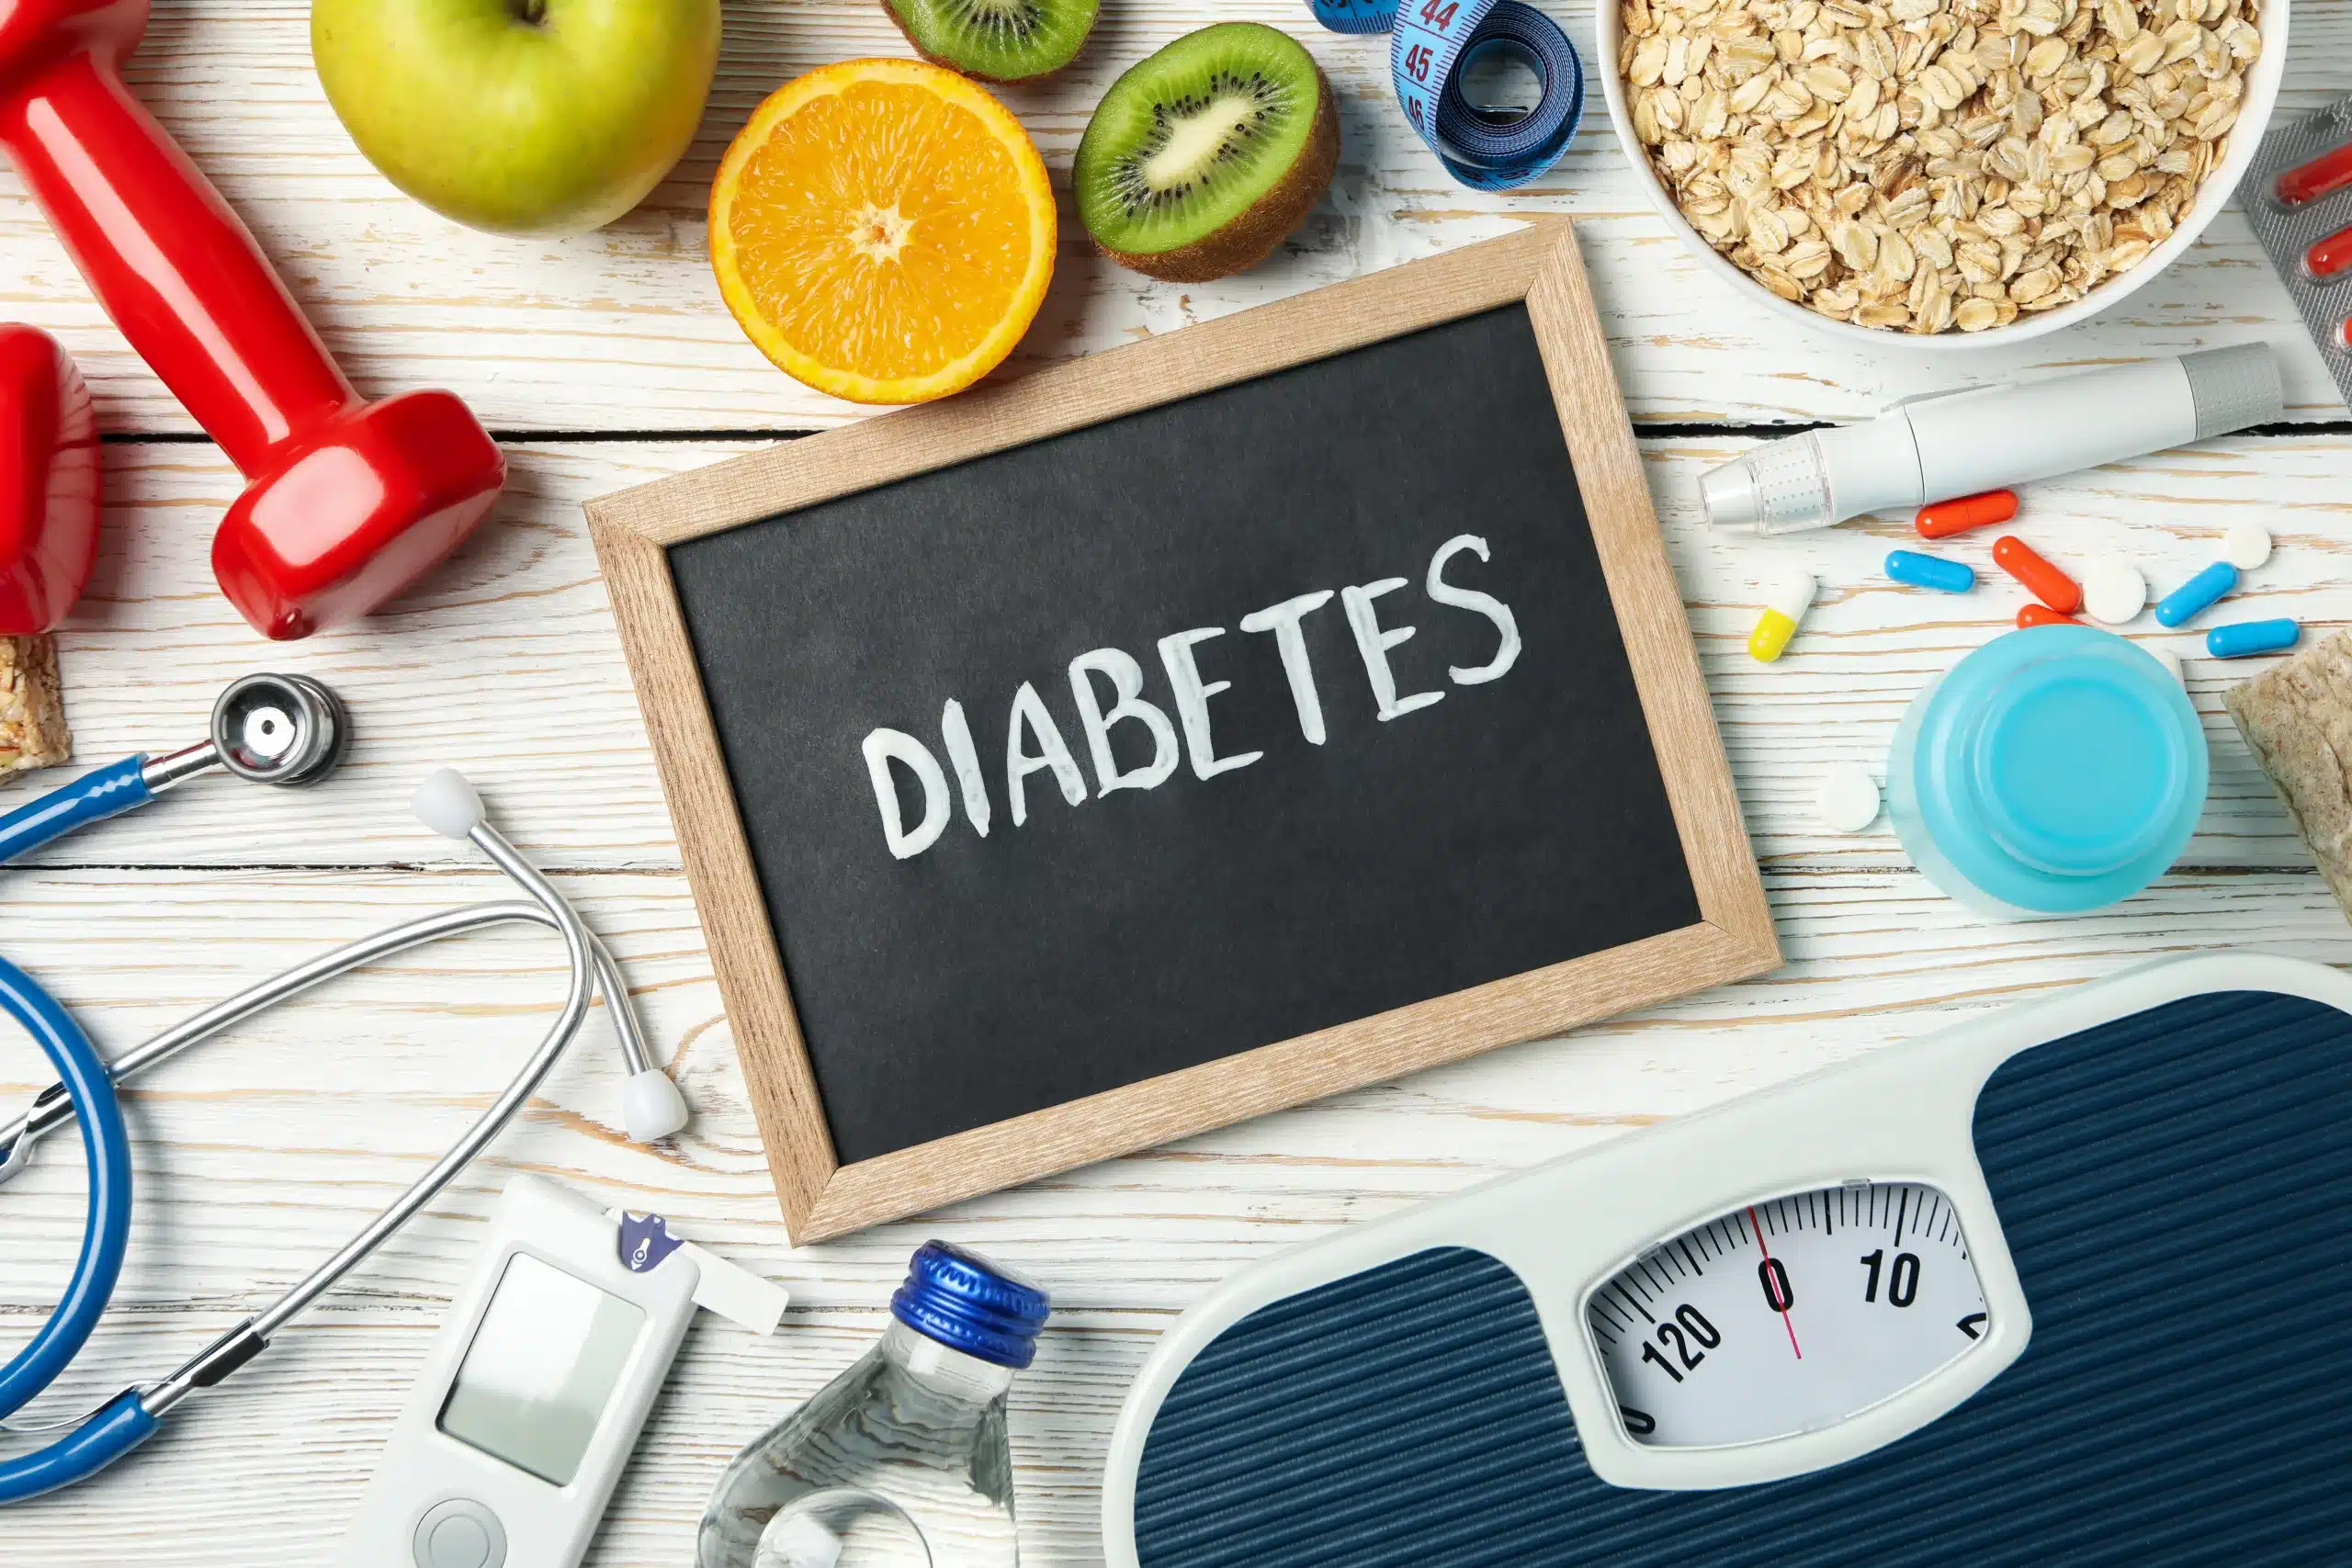 Early Detection of Diabetic Complications: Signs, Symptoms, and Testing